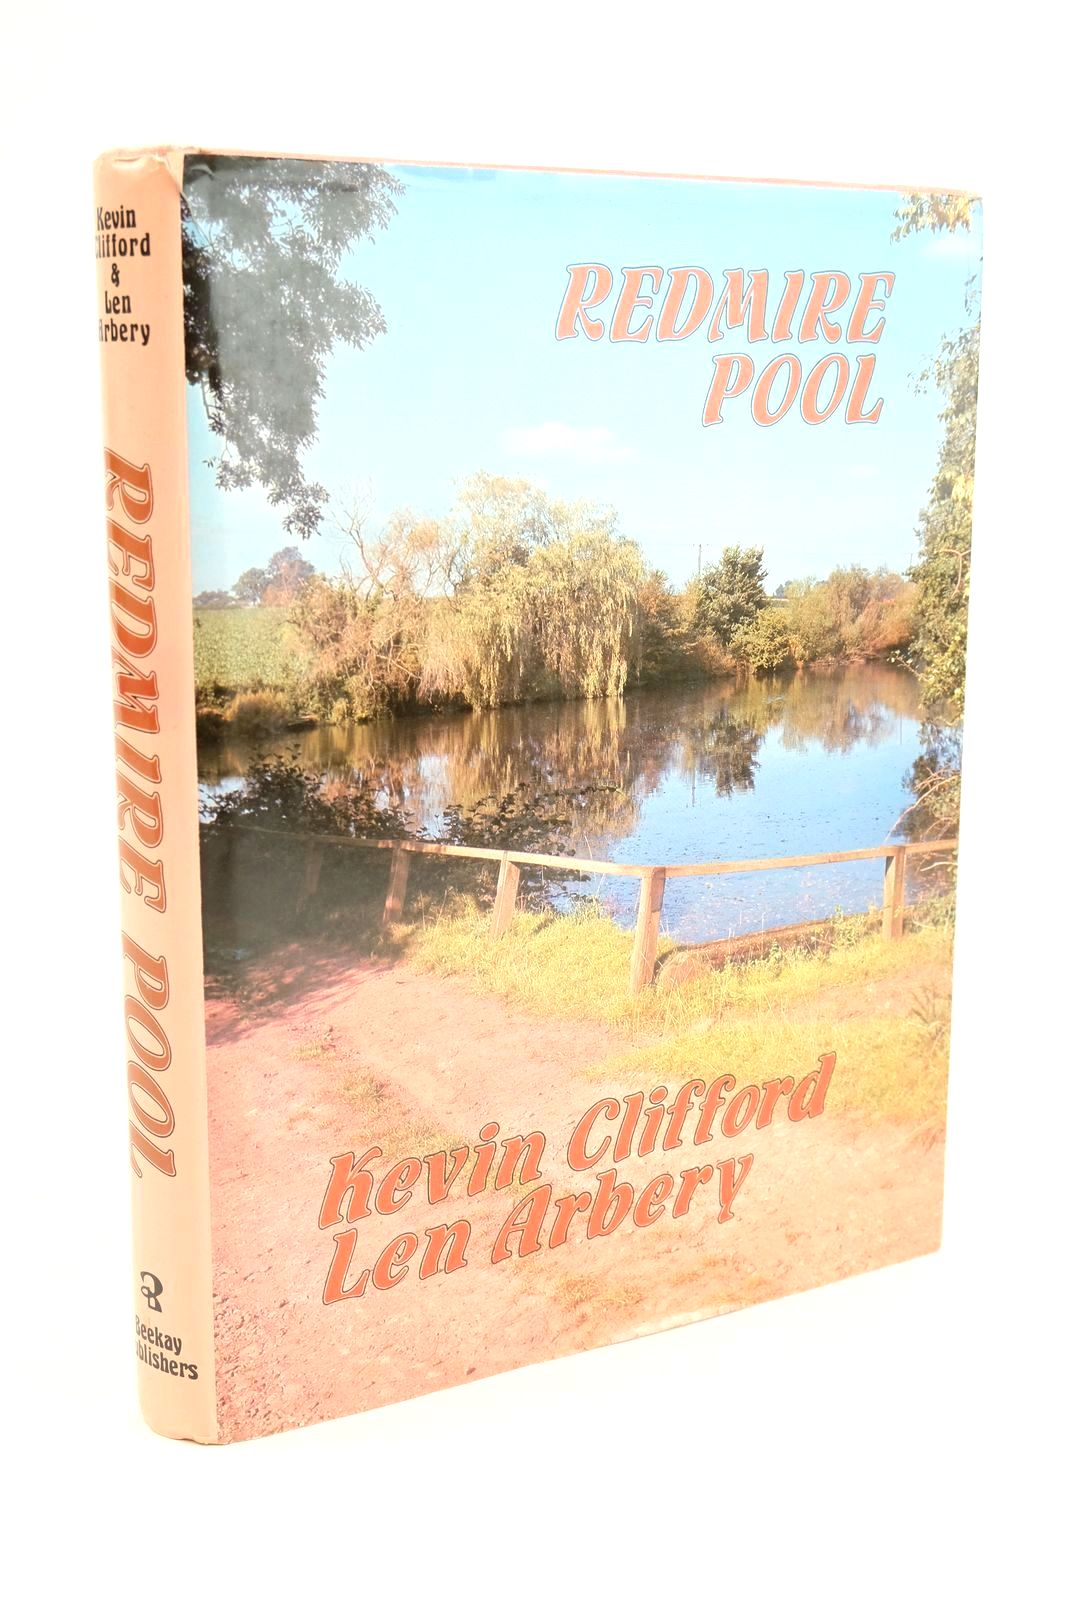 Photo of REDMIRE POOL written by Clifford, Kevin Arbury, L. BB,  published by Beekay Publishers (STOCK CODE: 1323765)  for sale by Stella & Rose's Books